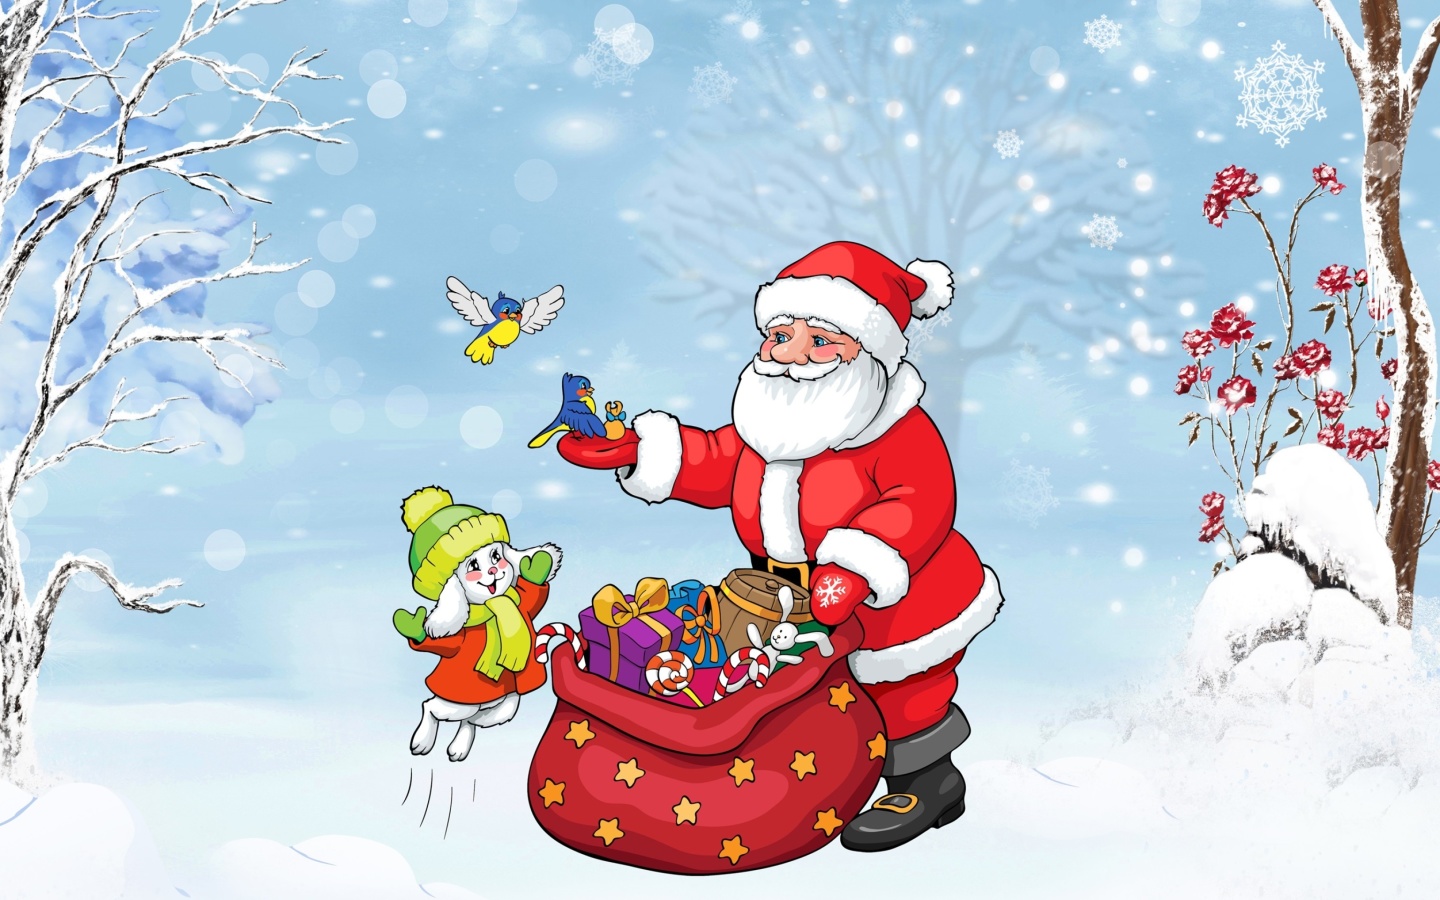 Santa Claus And The Christmas Adventure wallpaper 1440x900